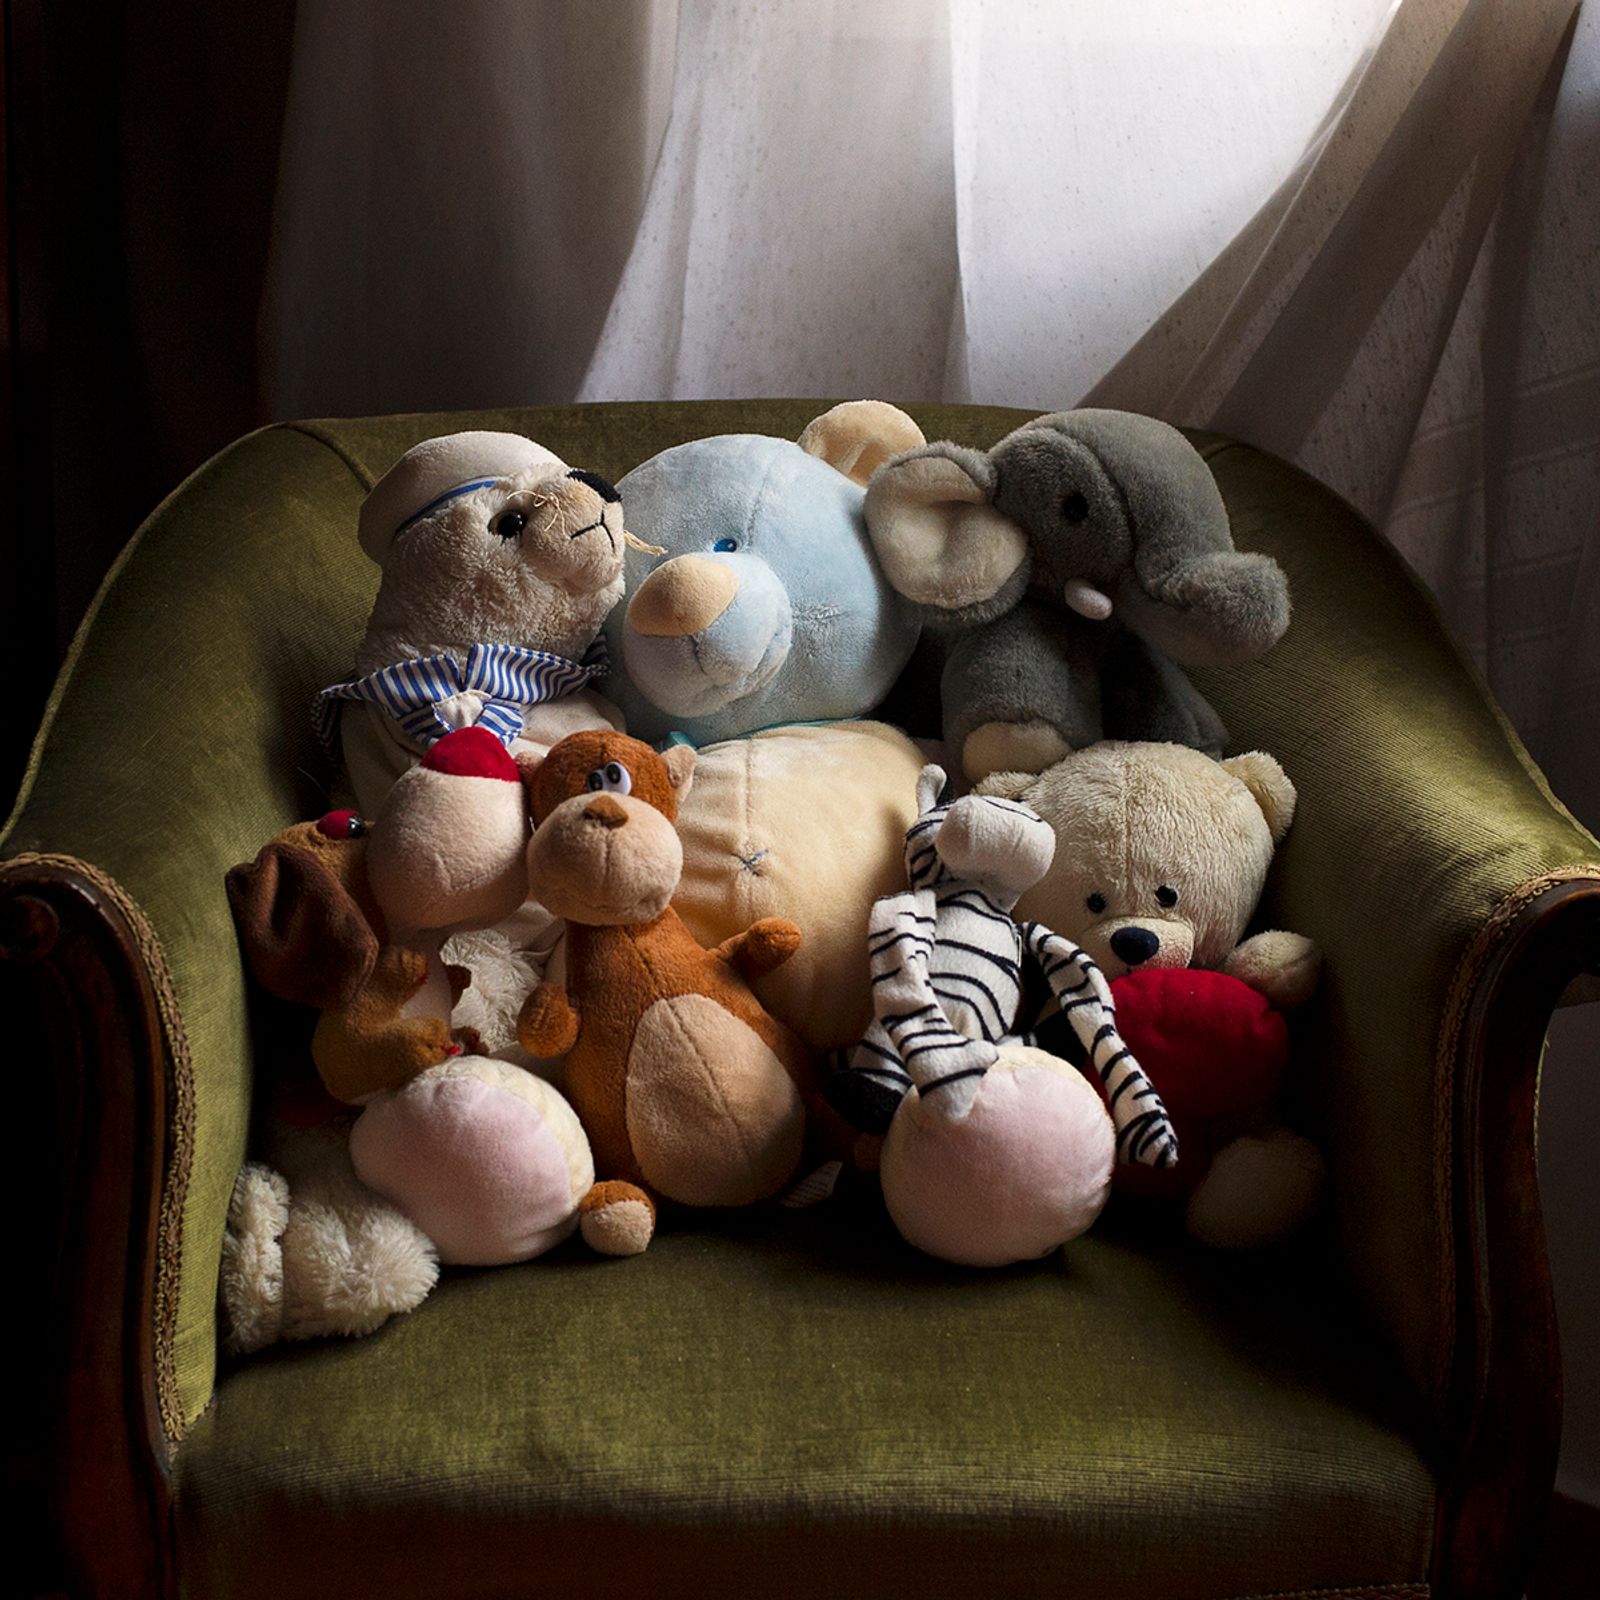 © Melissa Ianniello - The teddies that Maria Laura Annibali and Lidia Merlo have given each other as presents over the years (Rome – Lazio).